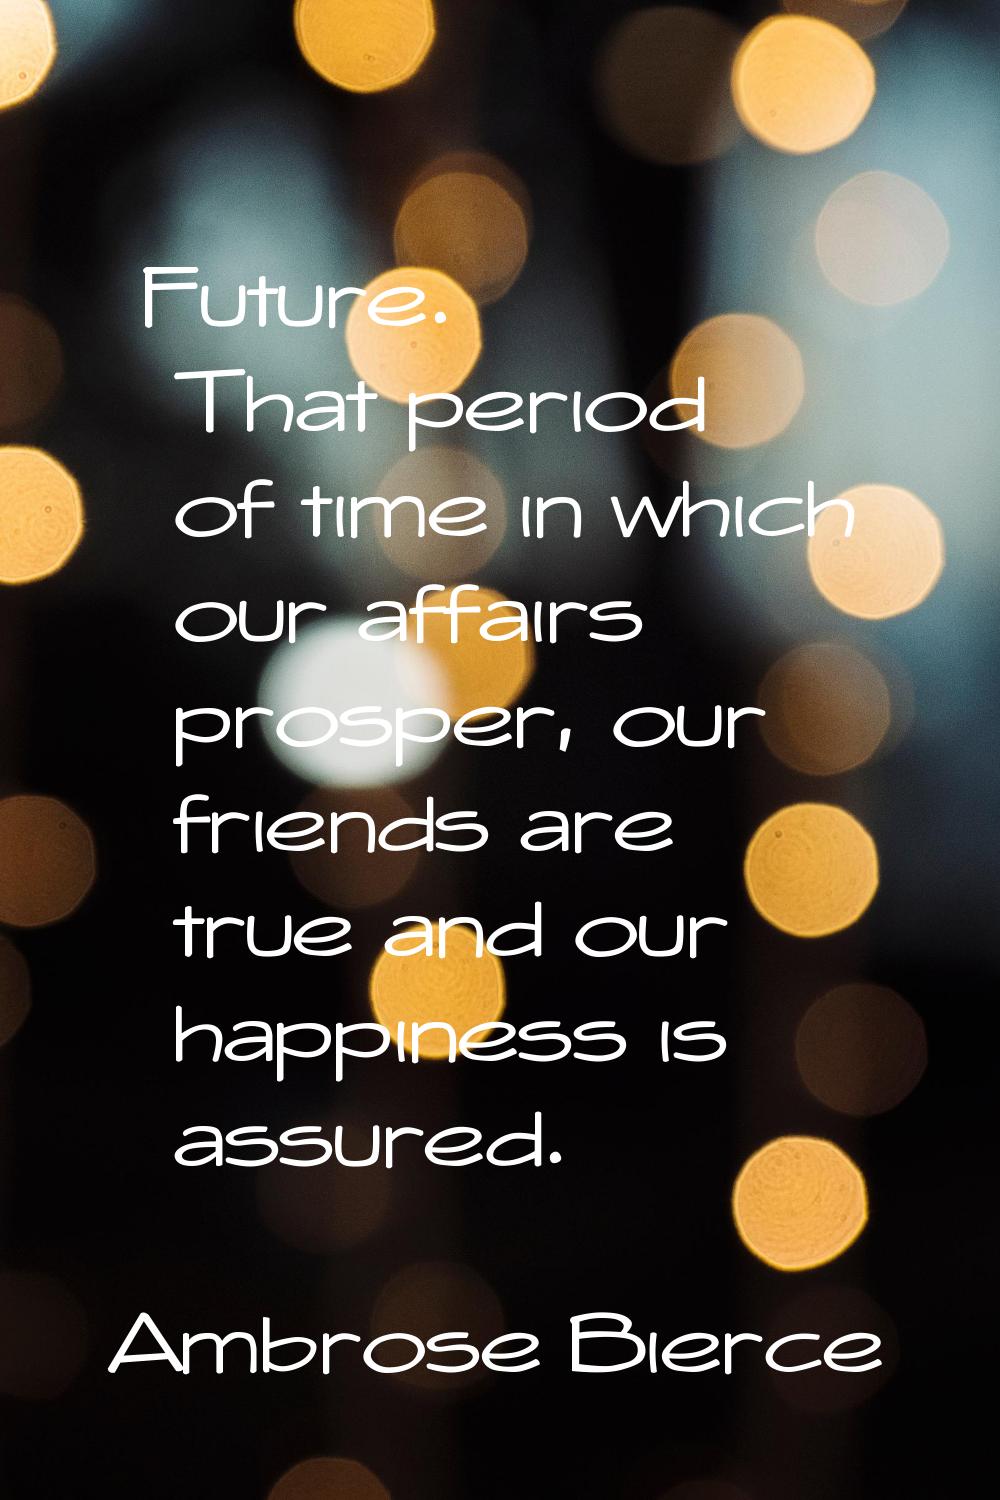 Future. That period of time in which our affairs prosper, our friends are true and our happiness is